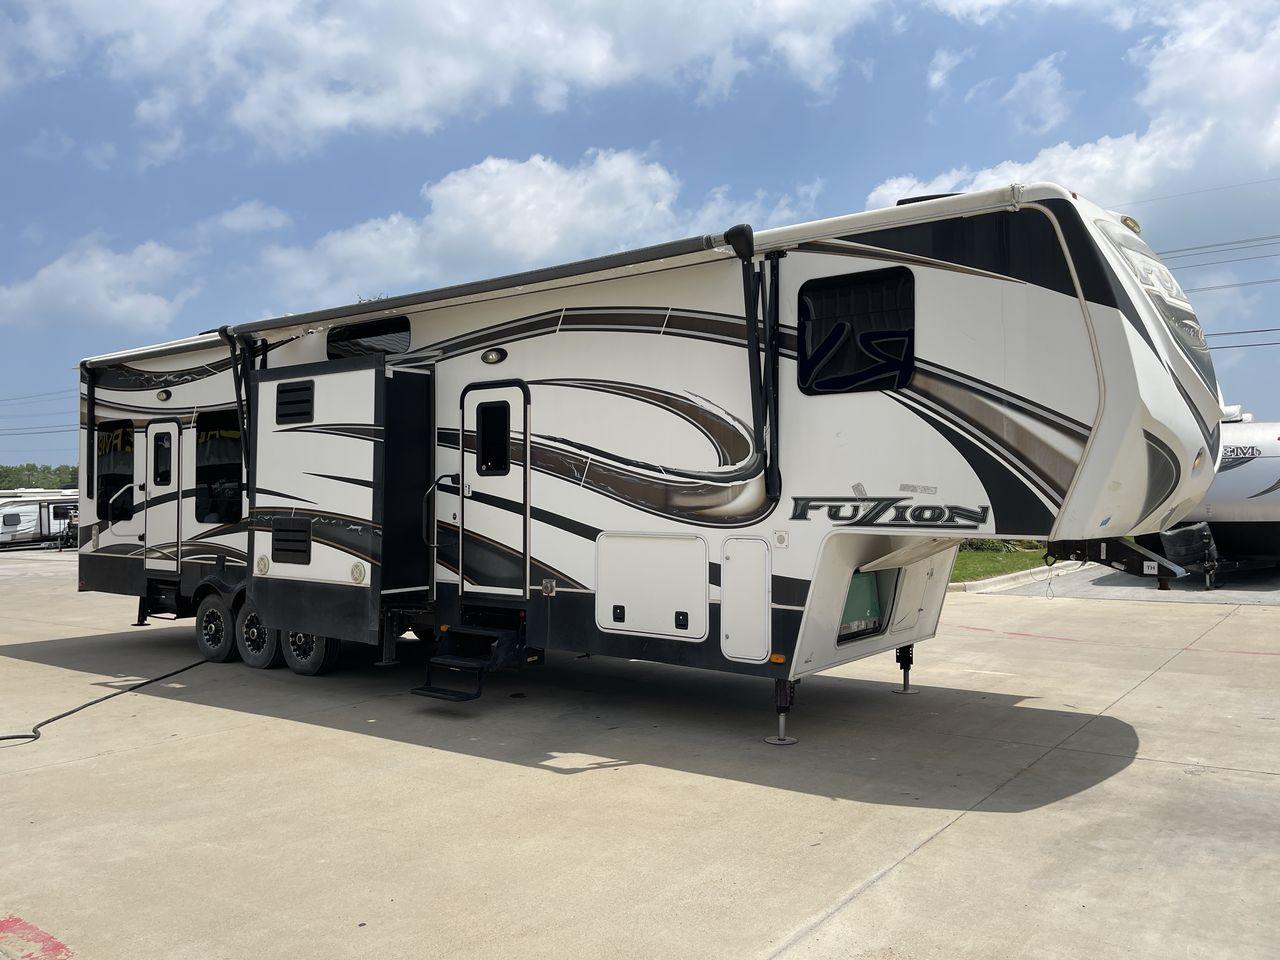 2014 WHITE KEYSTONE FUZION M-399 (4YDF39939EF) , Length: 41 ft. | Dry Weight: 14,100 lbs. | Gross Weight: 18,000 lbs. | Slides: 3 transmission, located at 4319 N Main St, Cleburne, TX, 76033, (817) 678-5133, 32.385960, -97.391212 - The 2014 Keystone Fuzion M-399 offers exceptional value for its price. With its white exterior color, this RV stands out on the road and is sure to turn heads wherever you go. Measuring 41 ft. in length, this toy hauler provides ample space for you and your loved ones to relax and enjoy your travels - Photo #24